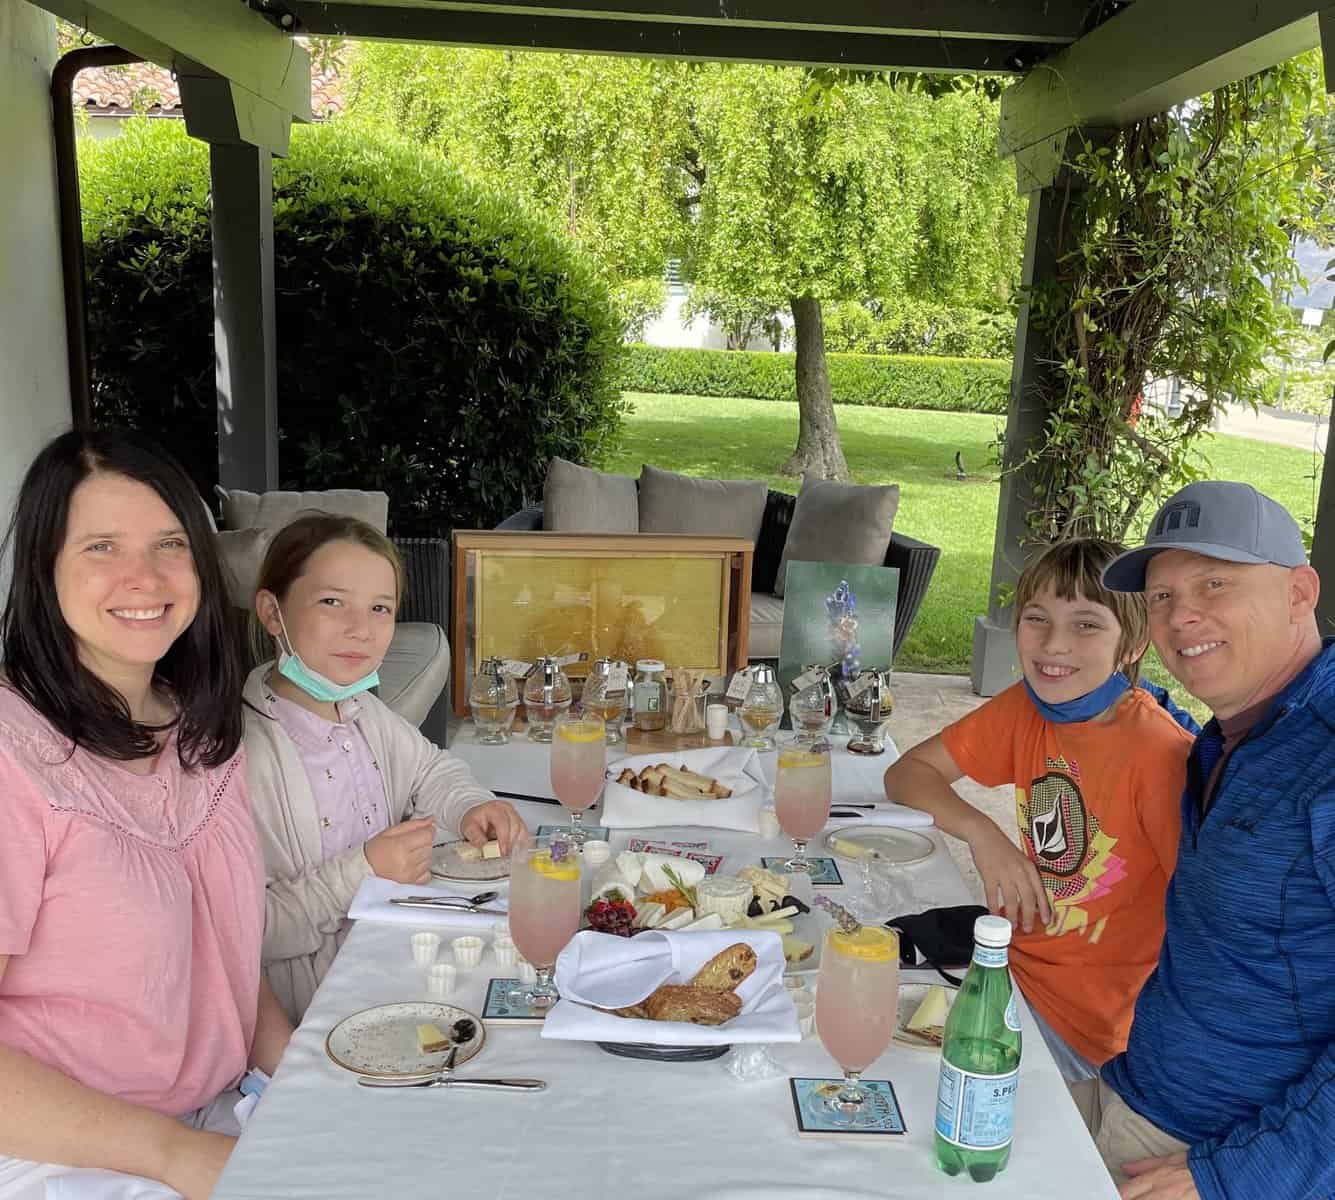 Heather and family at an outdoor table for gluten-free honey tasting